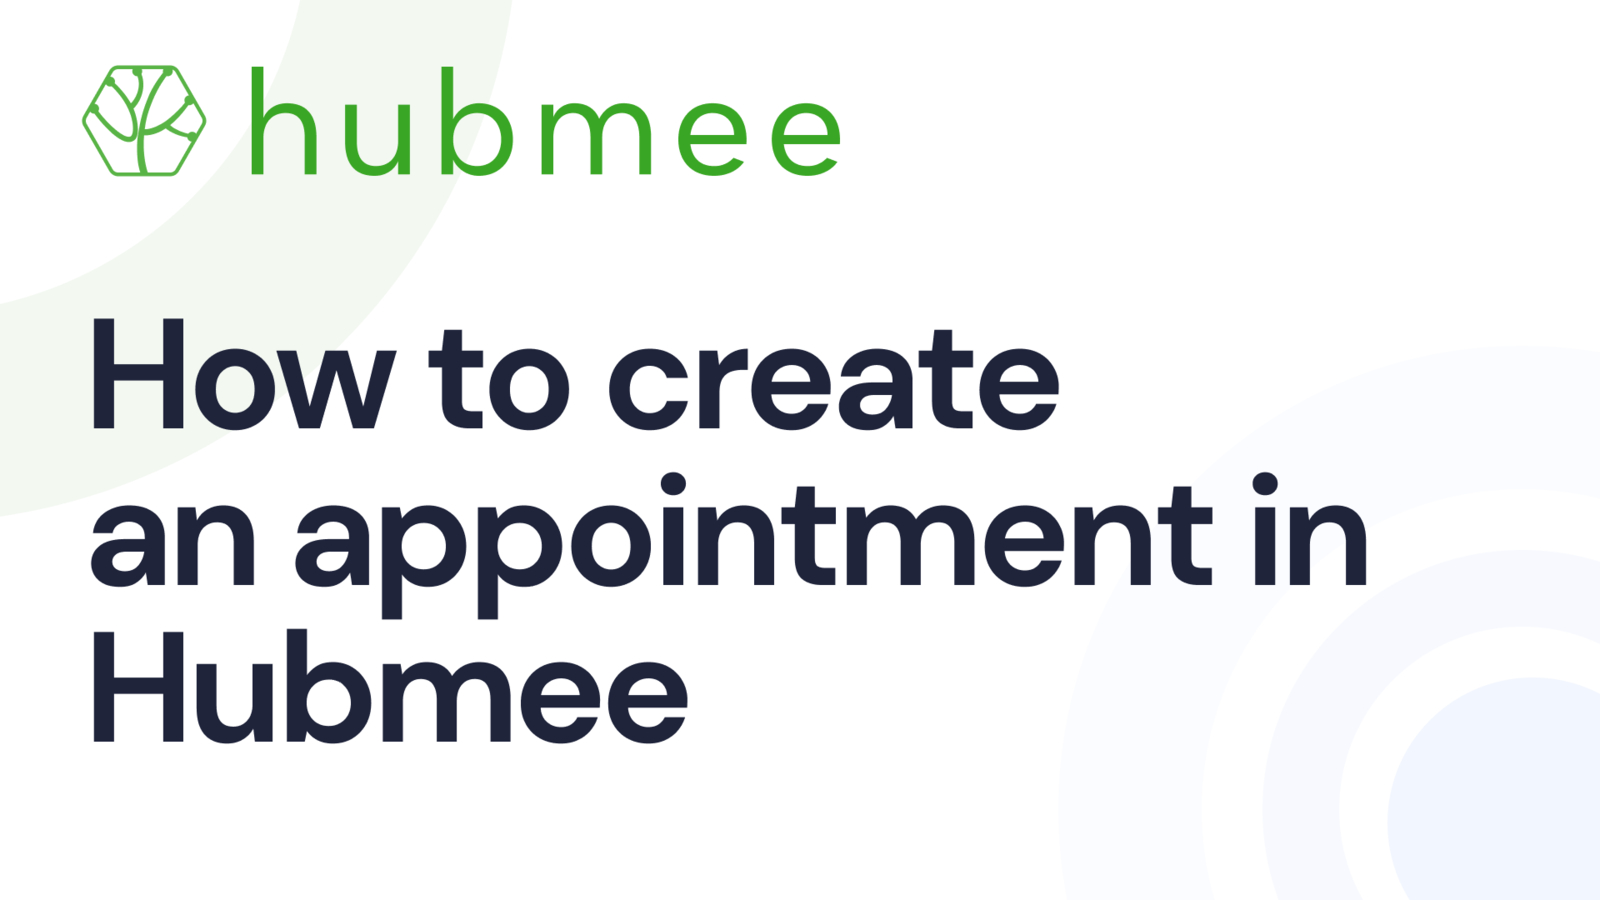 How to create an appointment in Hubmee